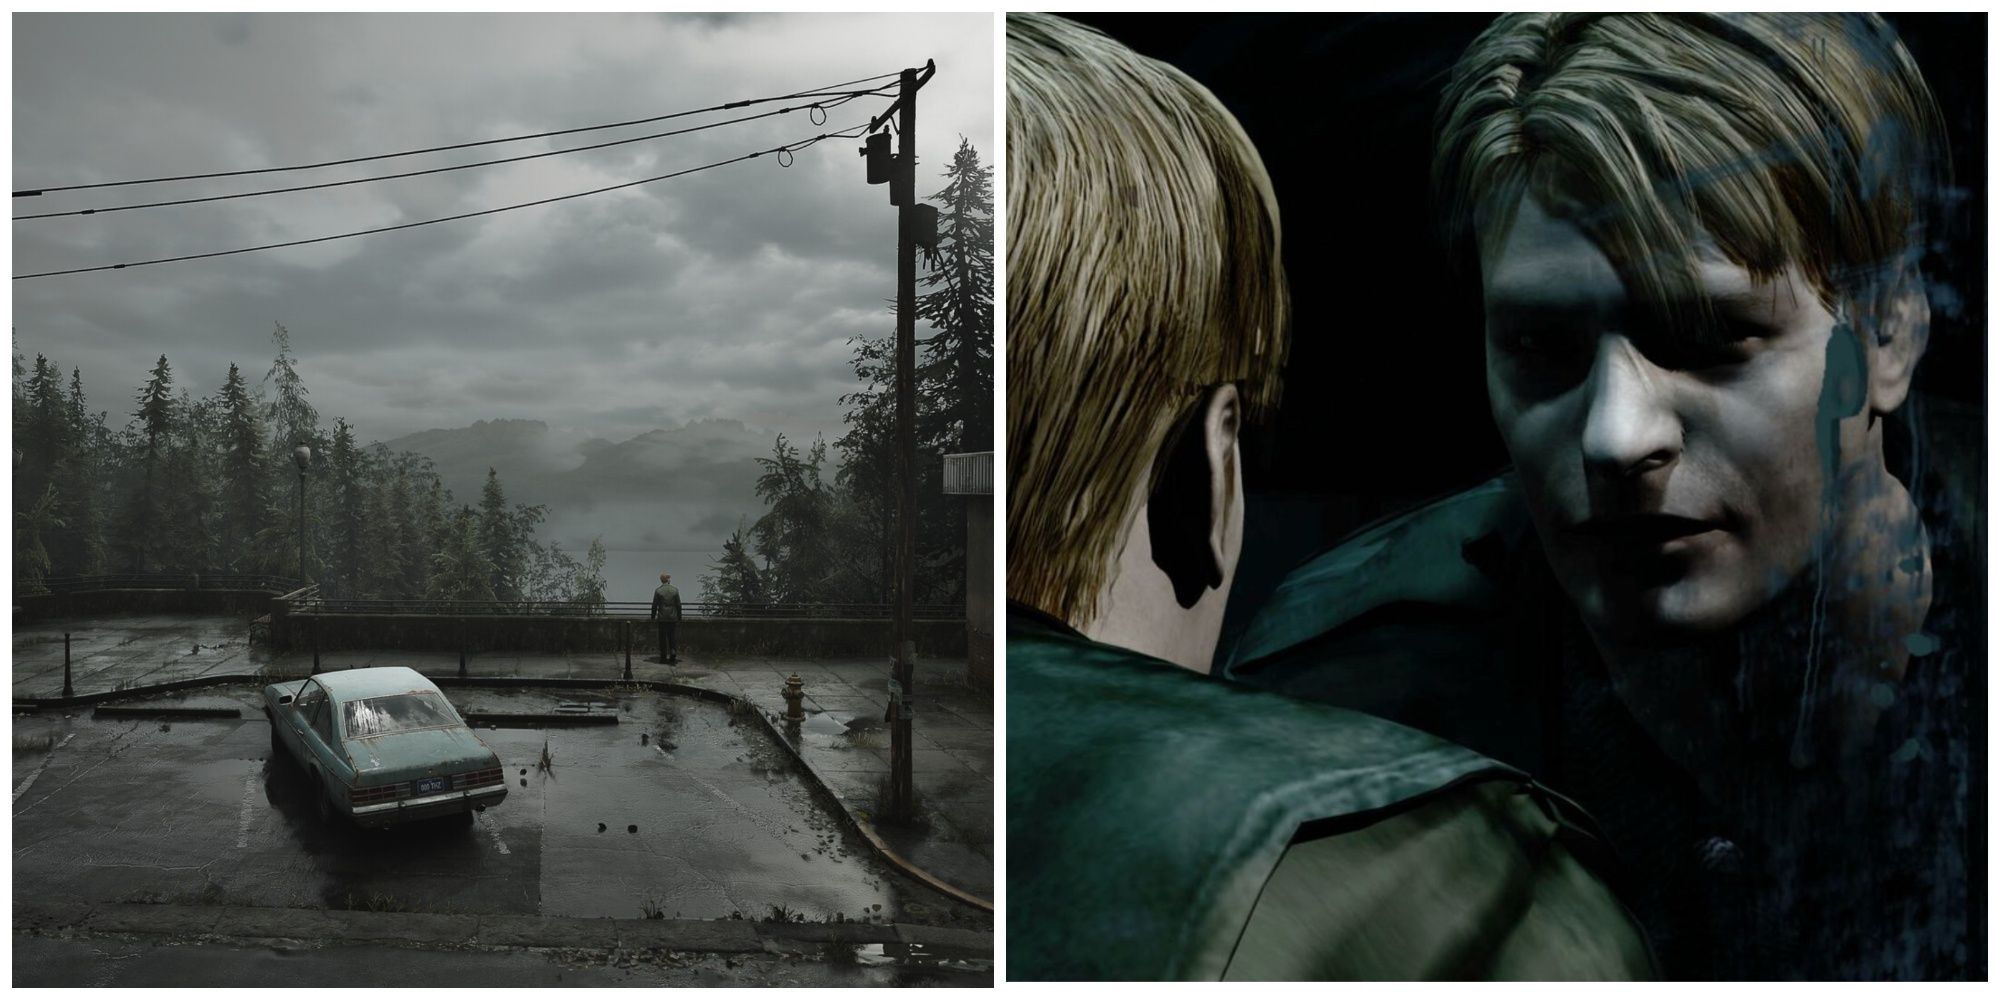 Silent Hill 2 System Requirements - Can I Run It? - PCGameBenchmark